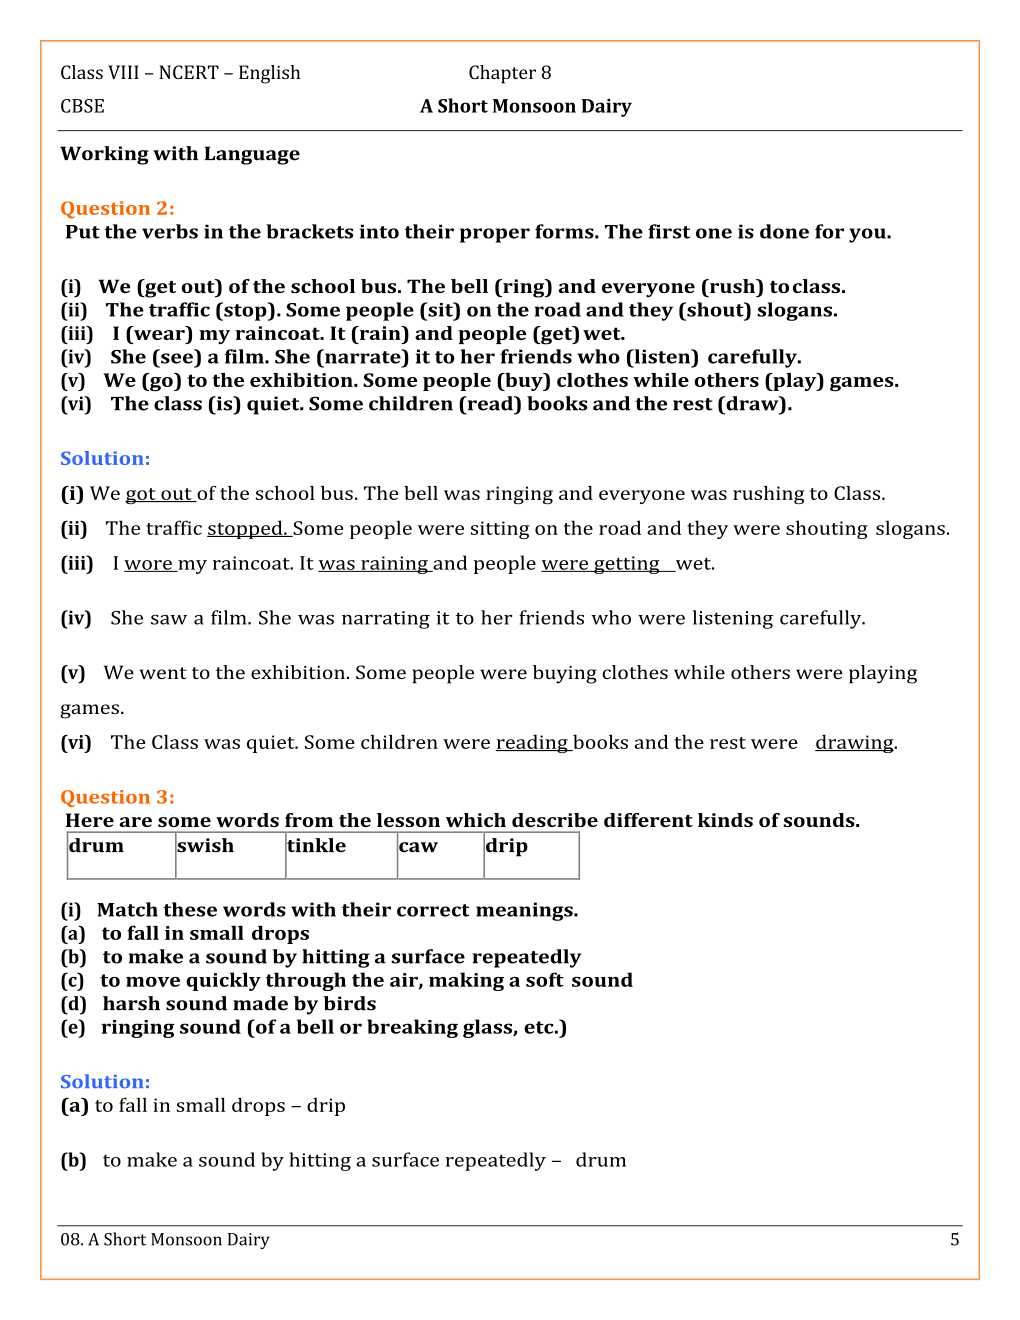 NCERT Solutions For Class 8 English Honey Dew Chapter 8 